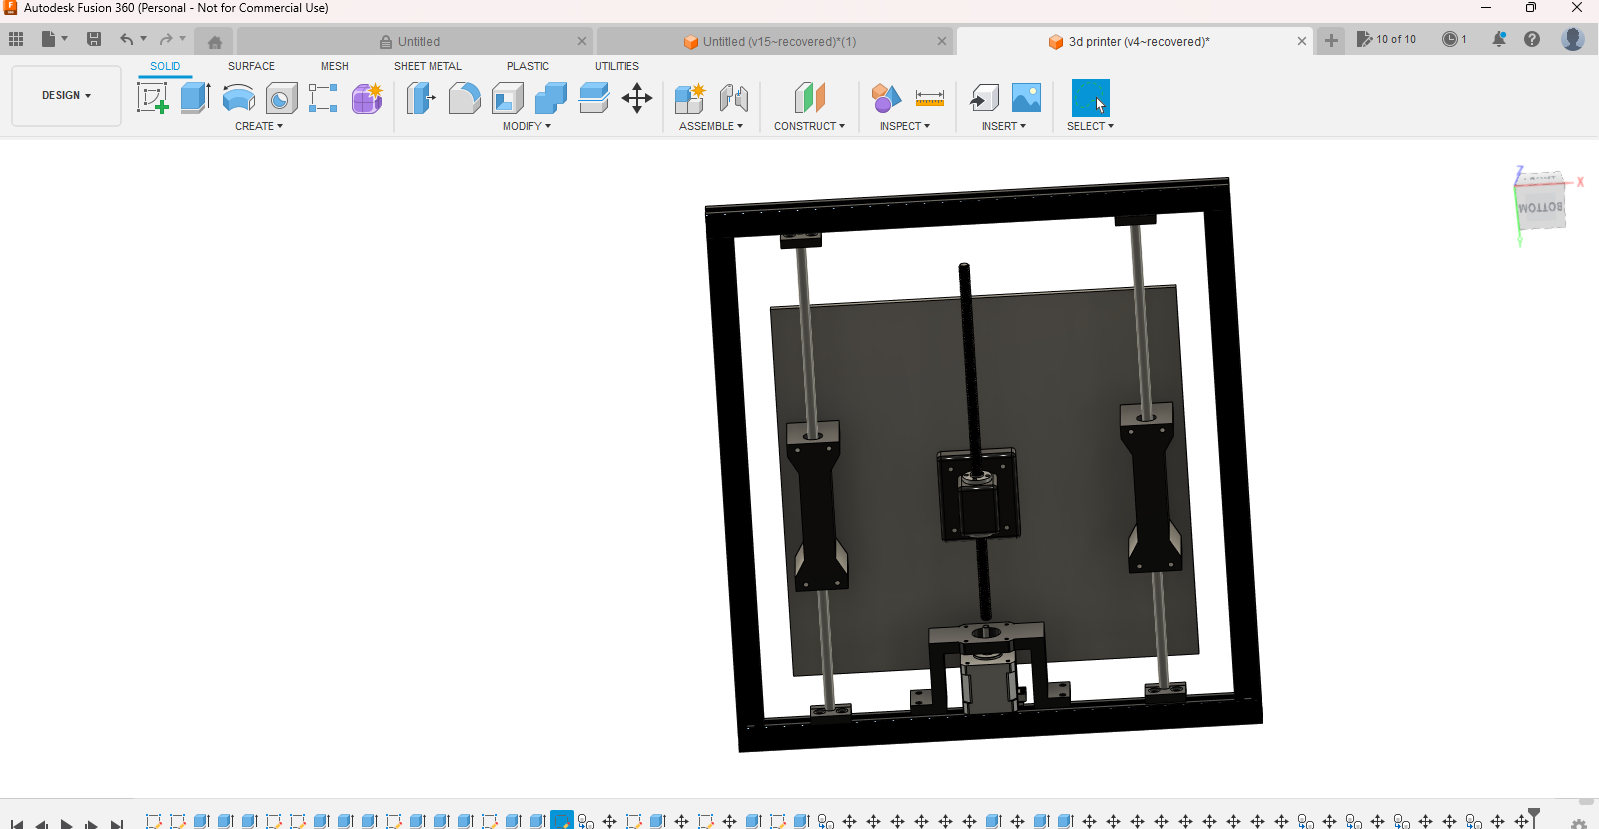 Autodesk Fusion 360 (Personal - Not for Commercial Use) 5_31_2023 7_44_22 PM.png